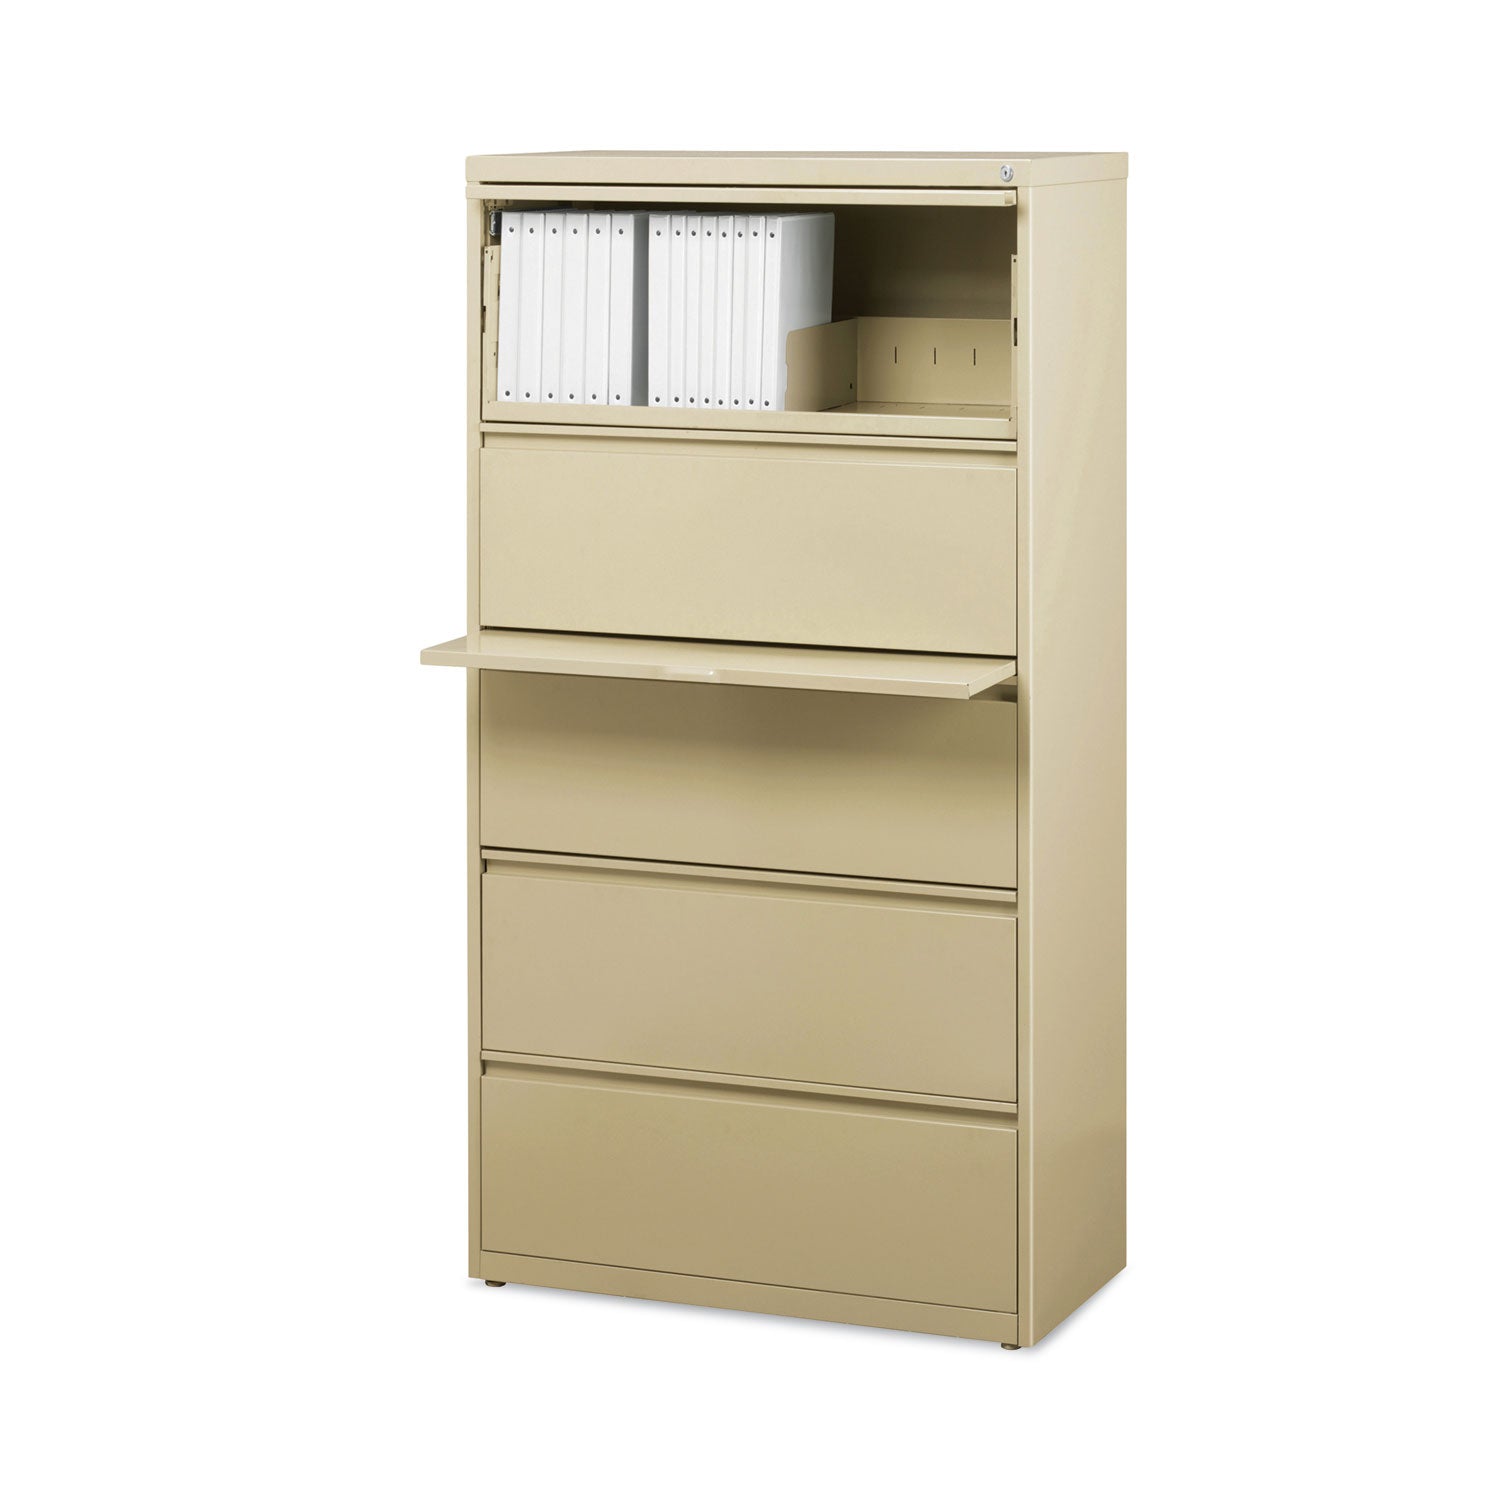 lateral-file-cabinet-5-letter-legal-a4-size-file-drawers-putty-30-x-1862-x-6762_hid14979 - 1